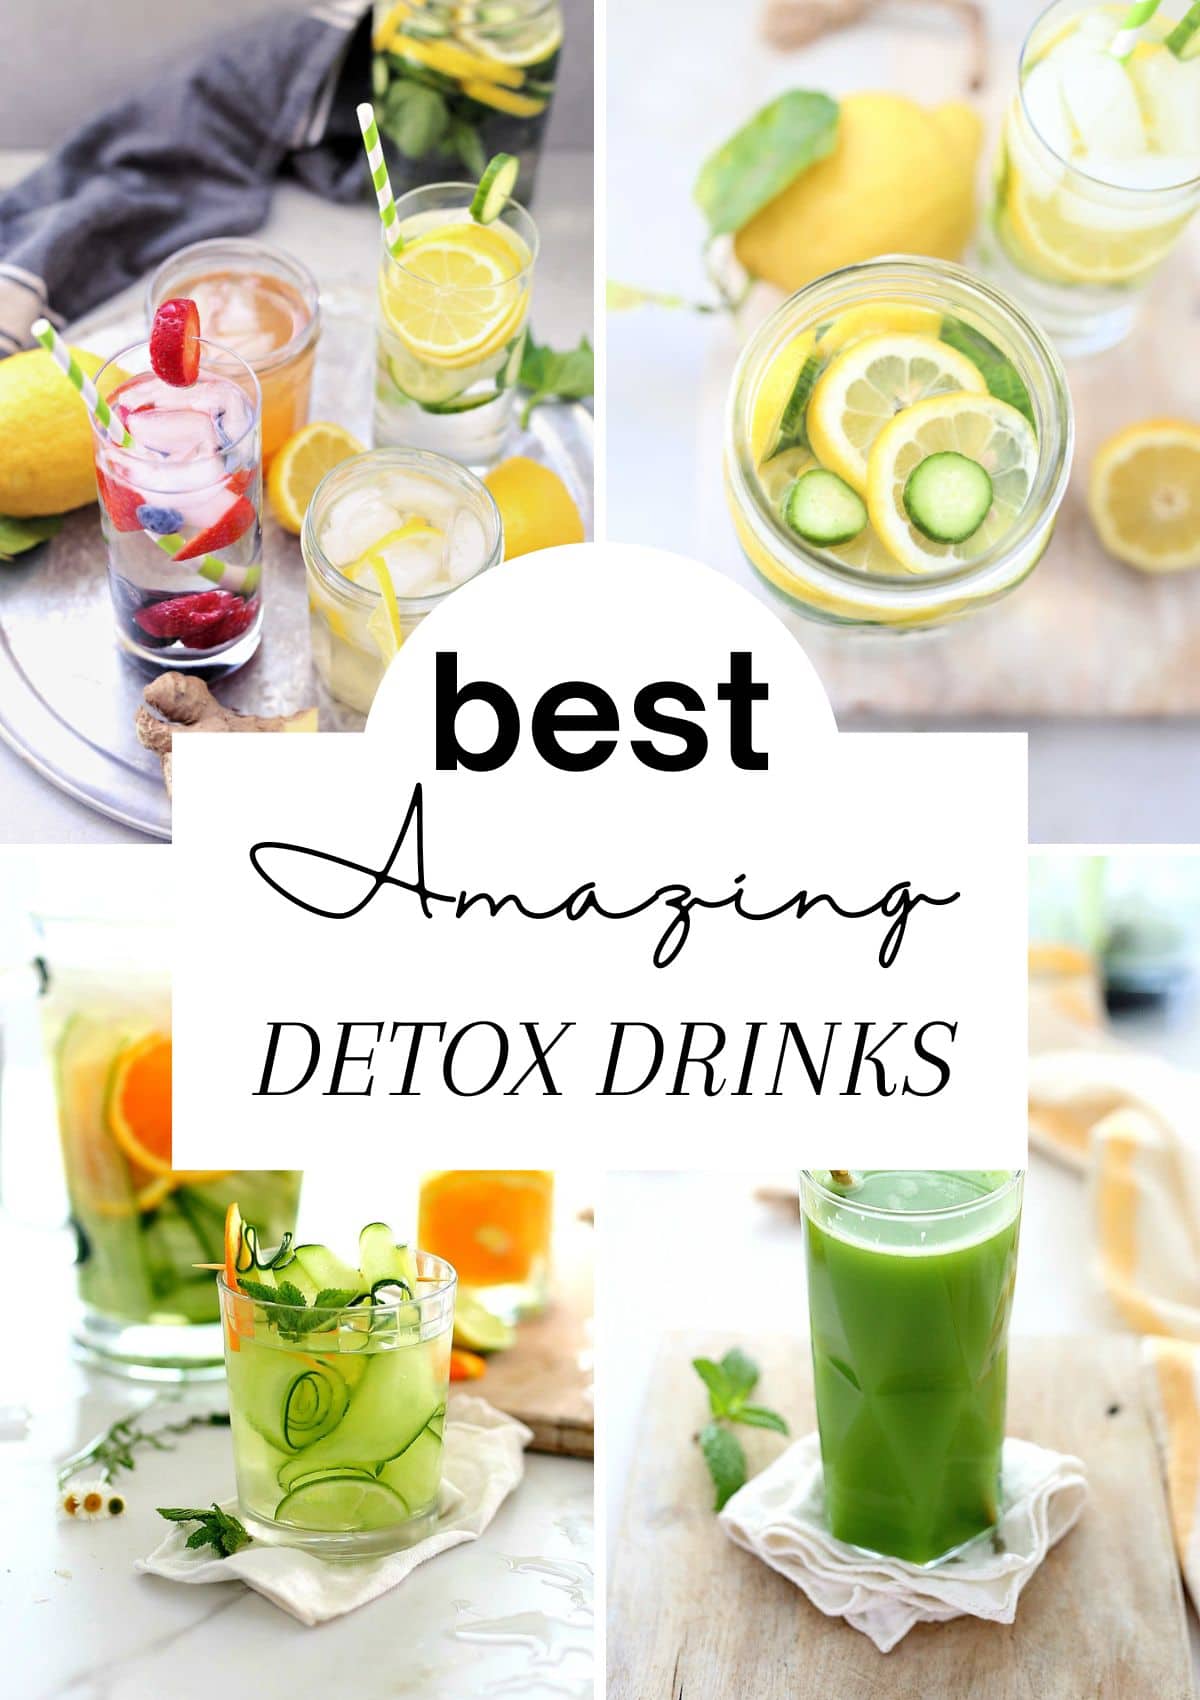 Smoothie Recipes: Tasty Recipes to Lose Weight, Detox and Cleanse, and  Other Great Benefits to Make You Feel Awesome